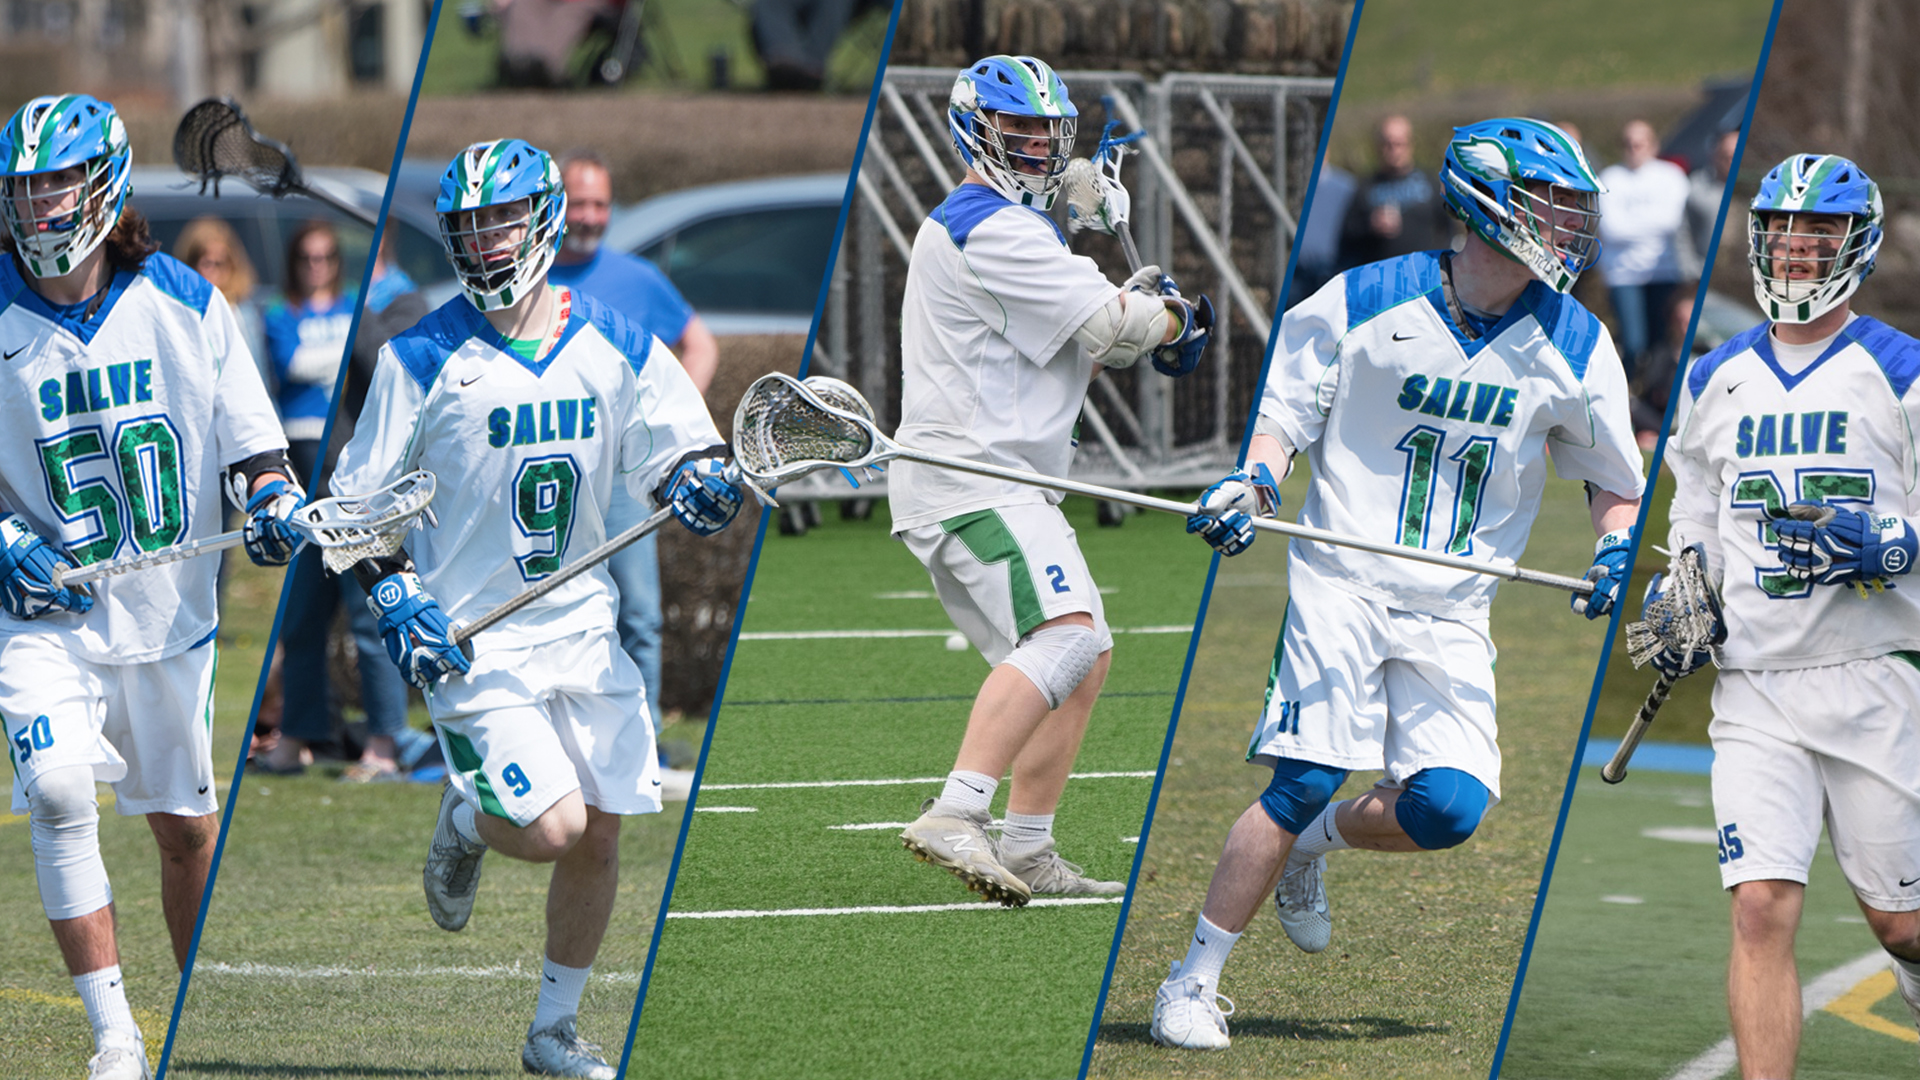 Pat Leary was named Rookie of the Year while four others garnered All-CCC recognition for the Seahawks.